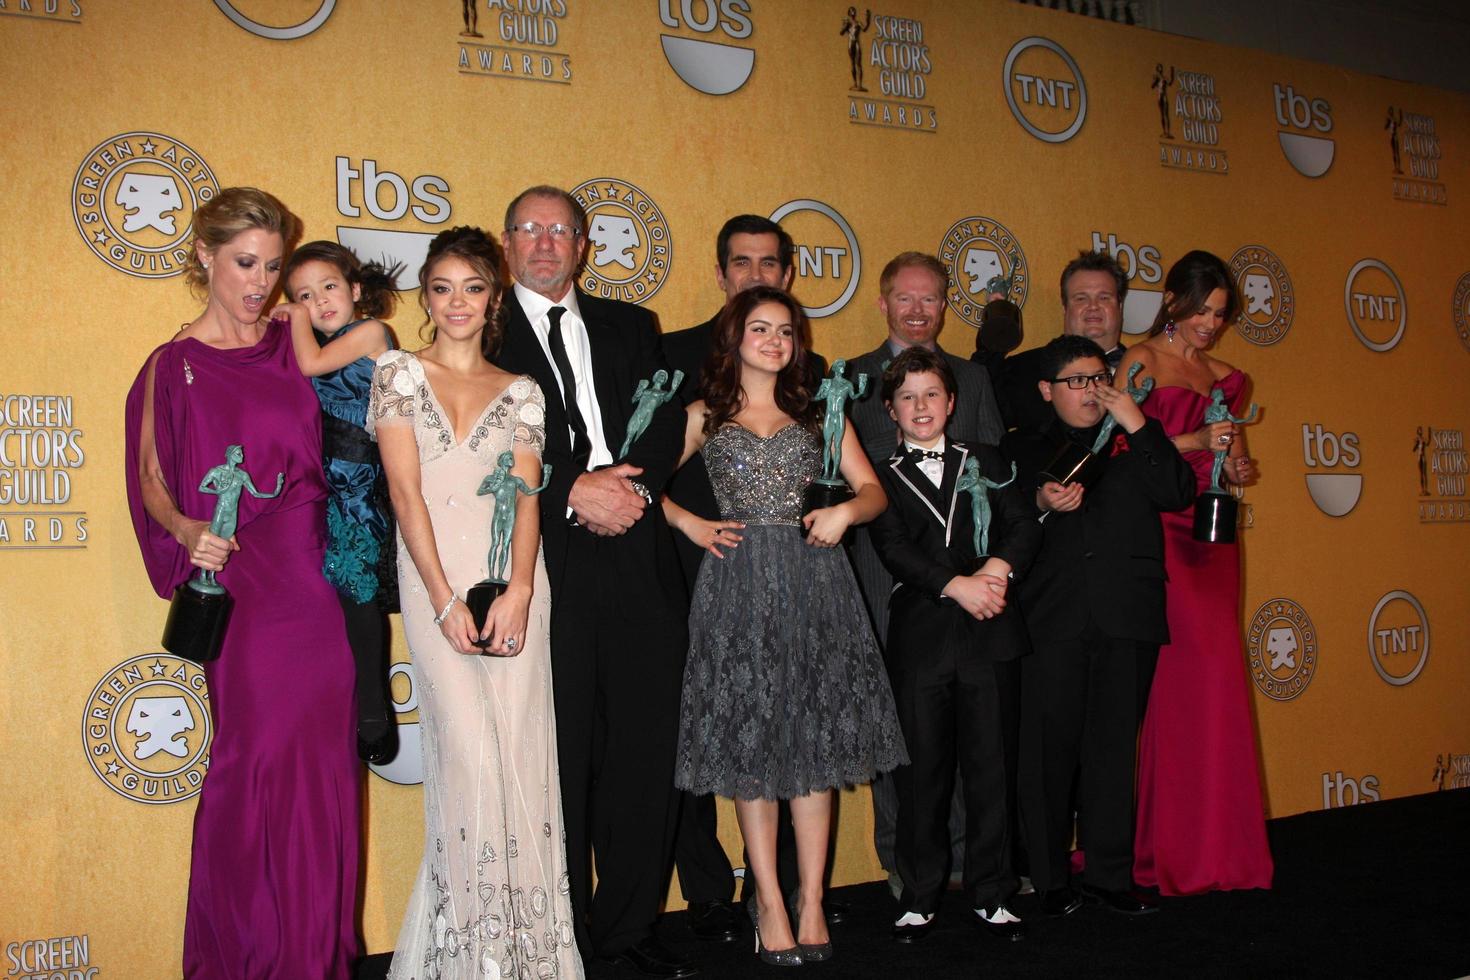 LOS ANGELES, JAN 29 - Modern Family Cast in the Press Room at the 18th Annual Screen Actors Guild Awards at Shrine Auditorium on January 29, 2012 in Los Angeles, CA photo